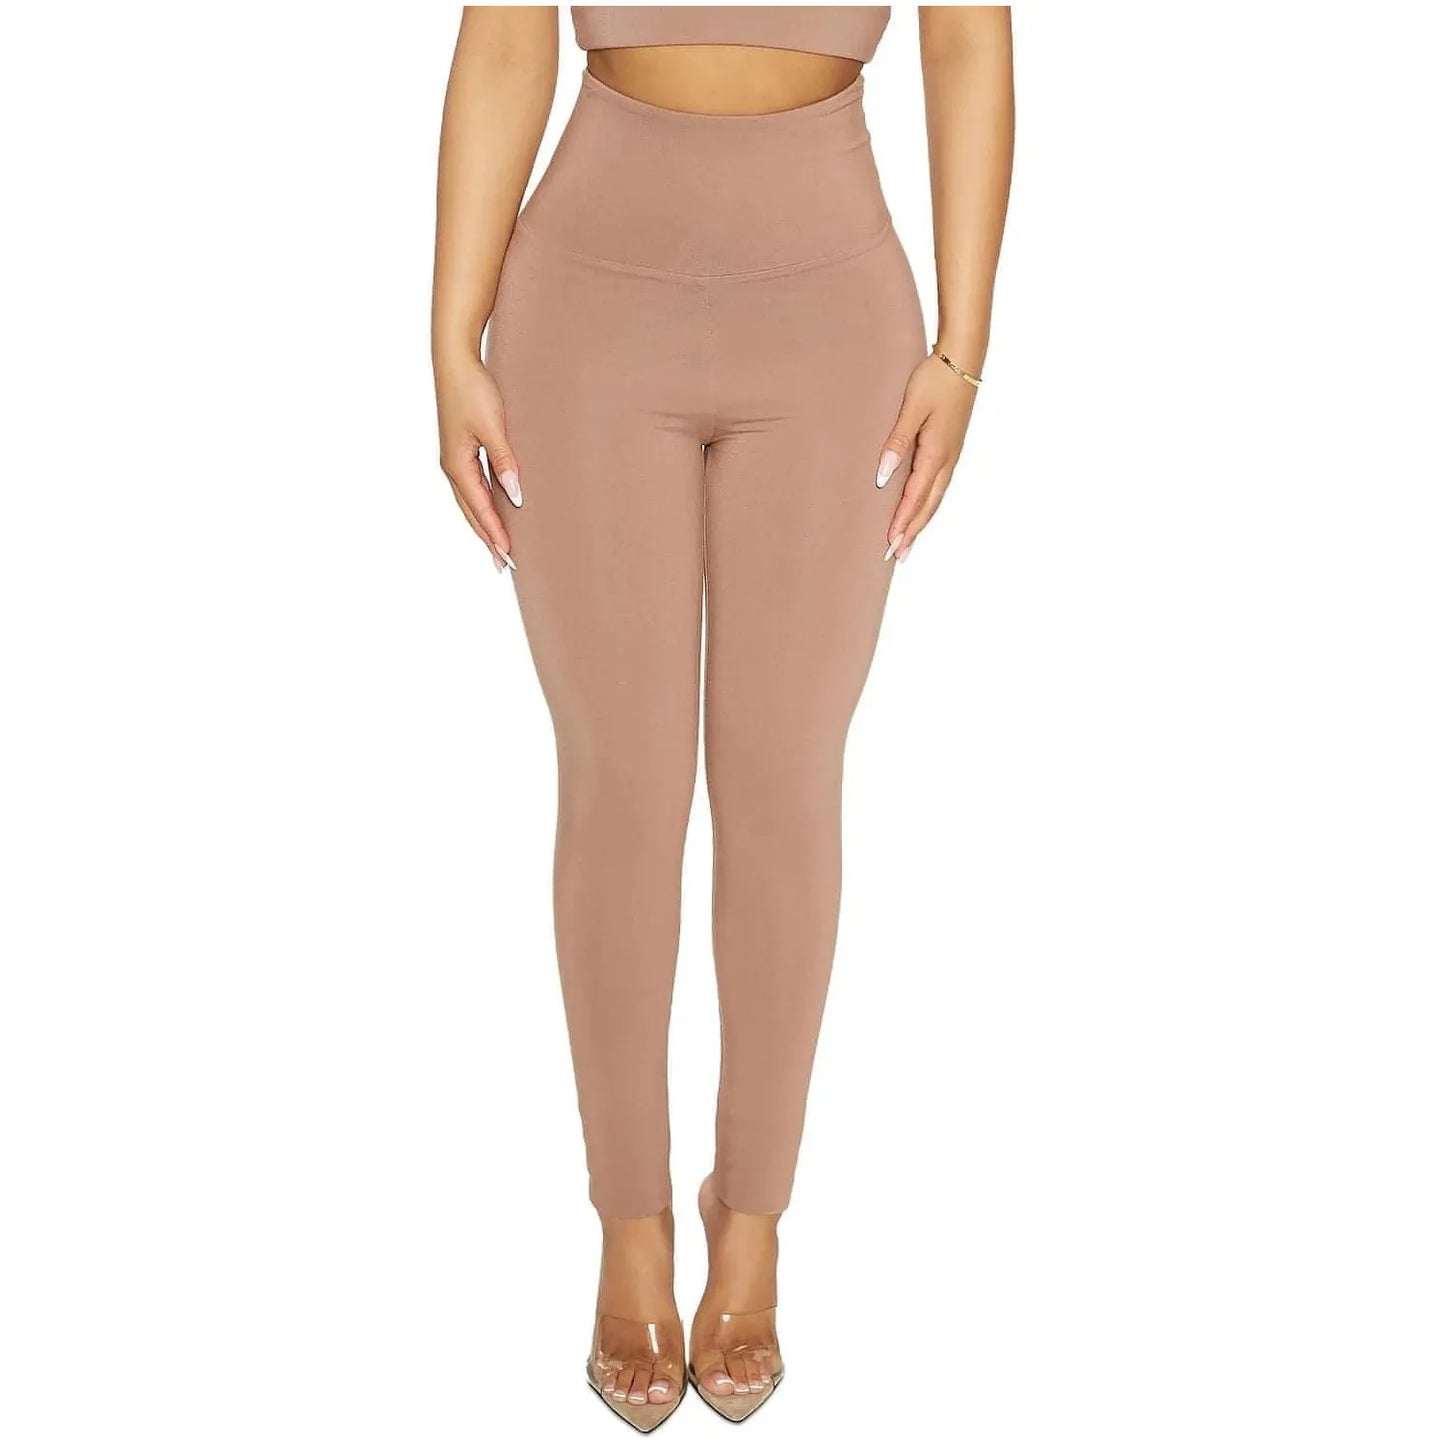 Naked Wardrobe The NW Wide Waistband Leggings - Coco - (Size Small) - Brandat Outlet